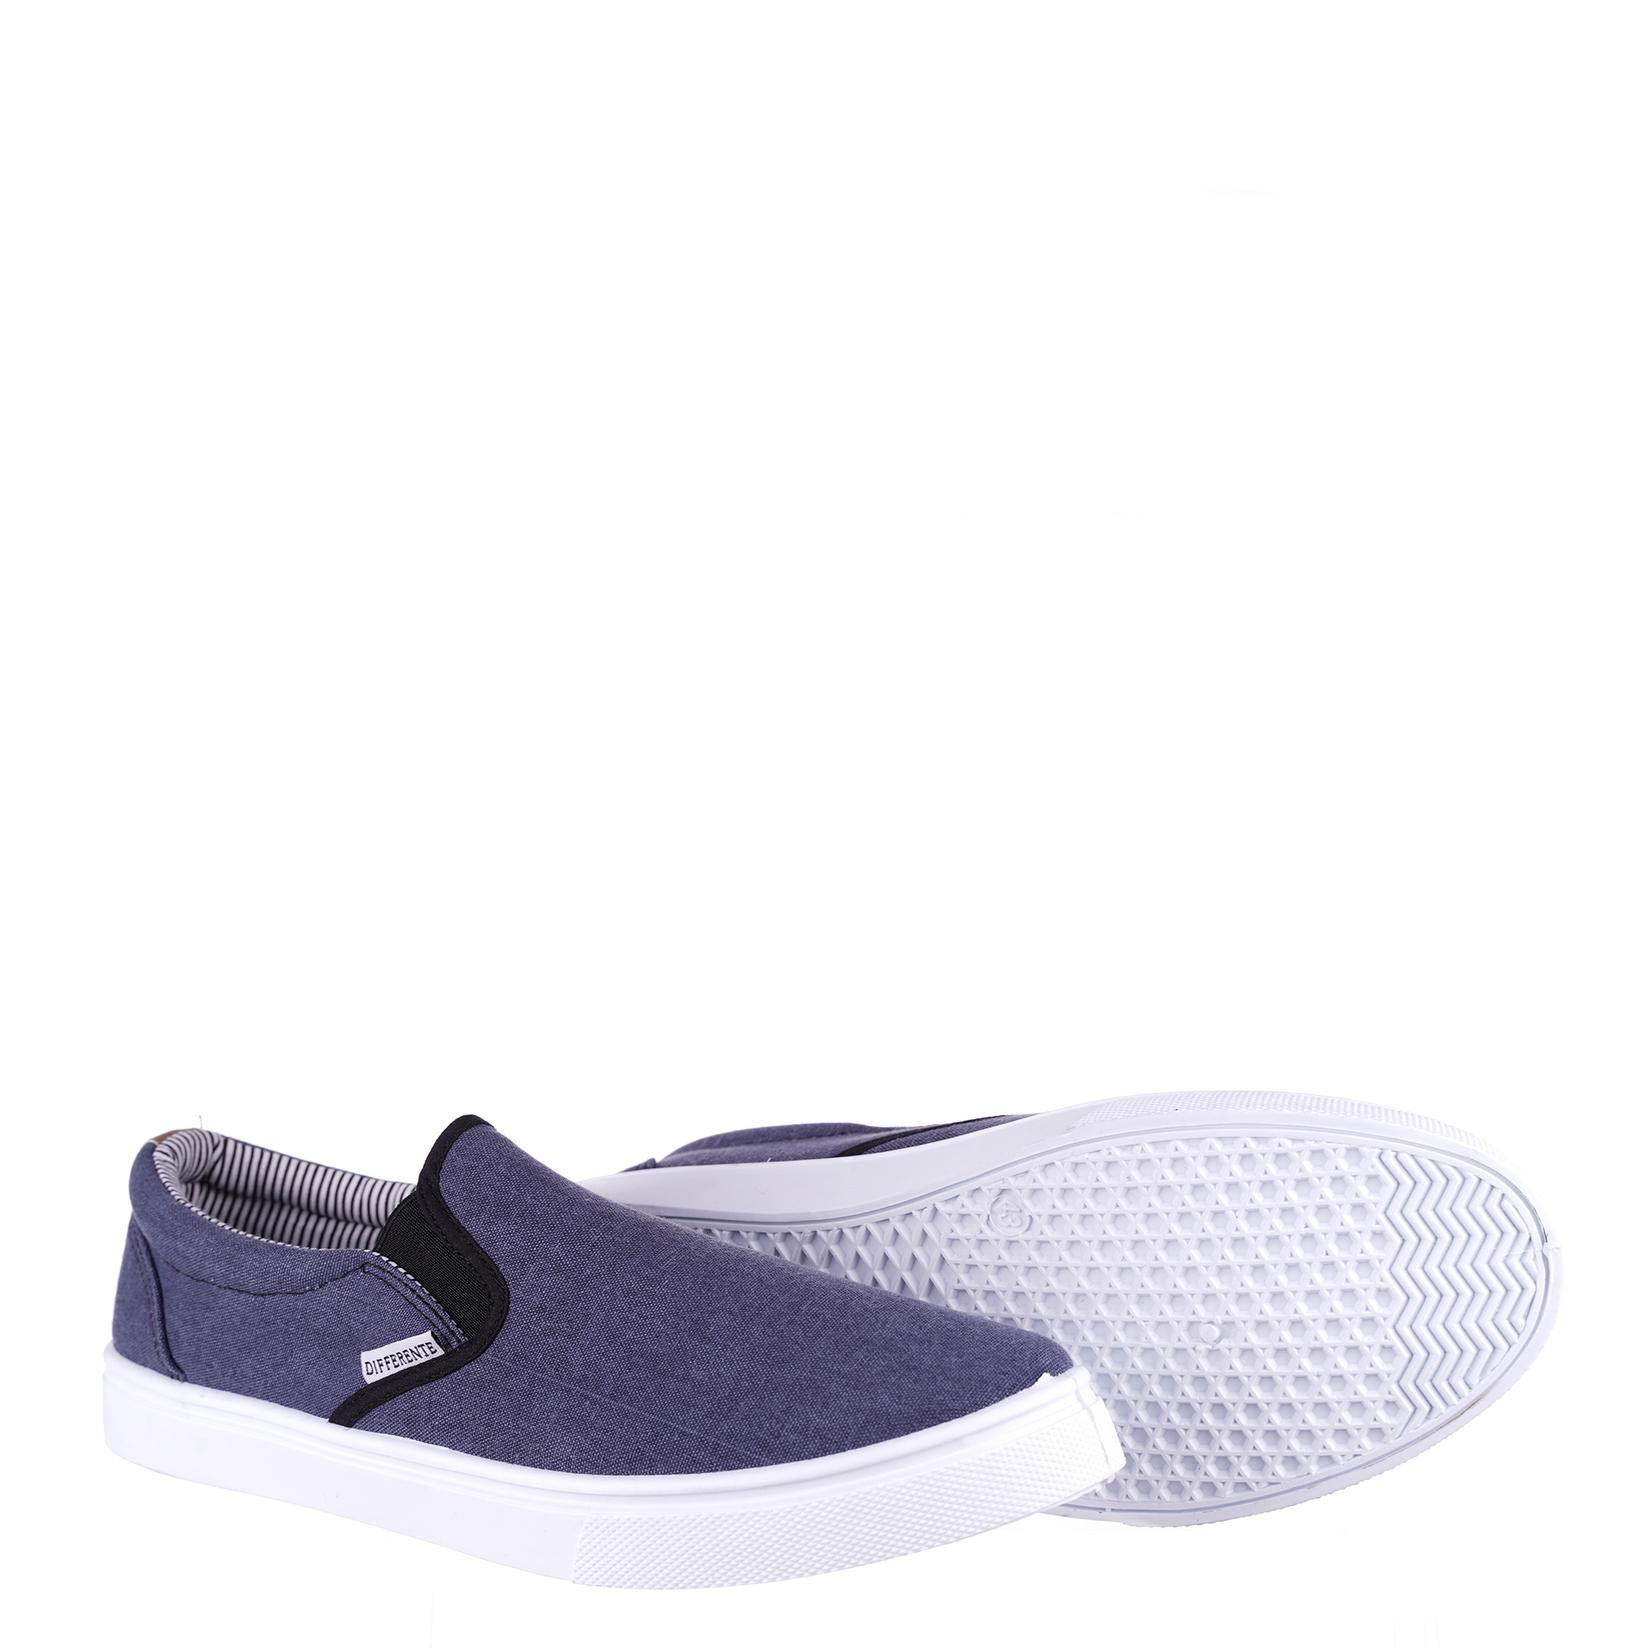 Selected image for DIFFERENTE Muške espadrile N71569, Plave